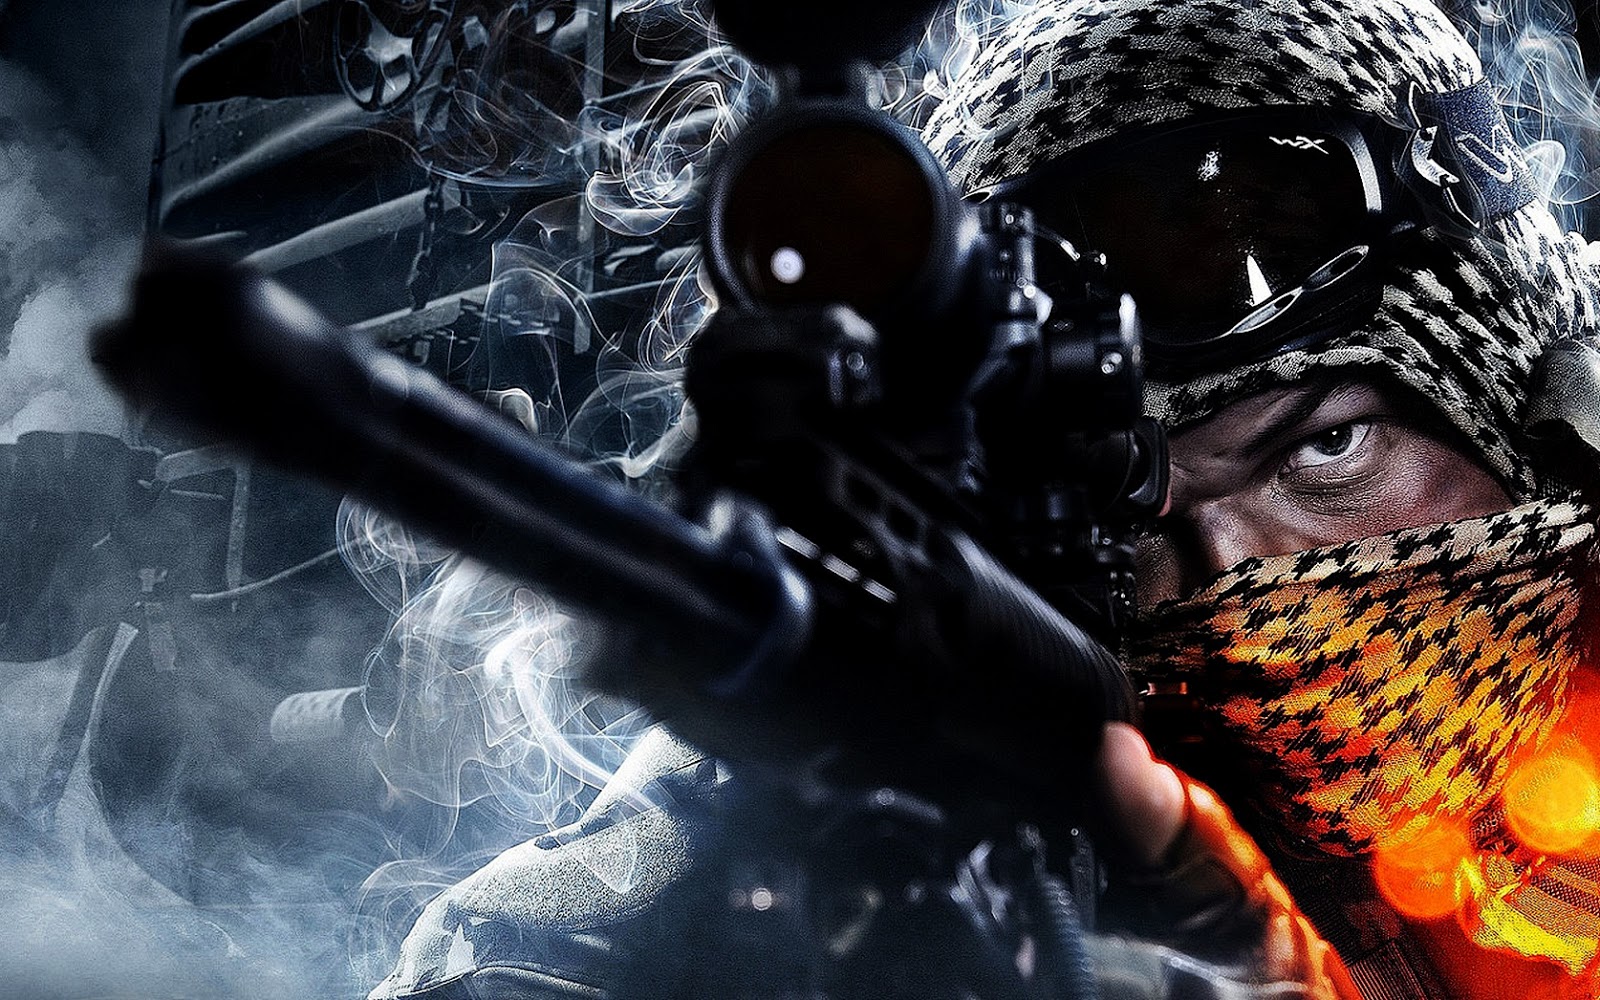 Best Sniper Wallpaper From Video Games In